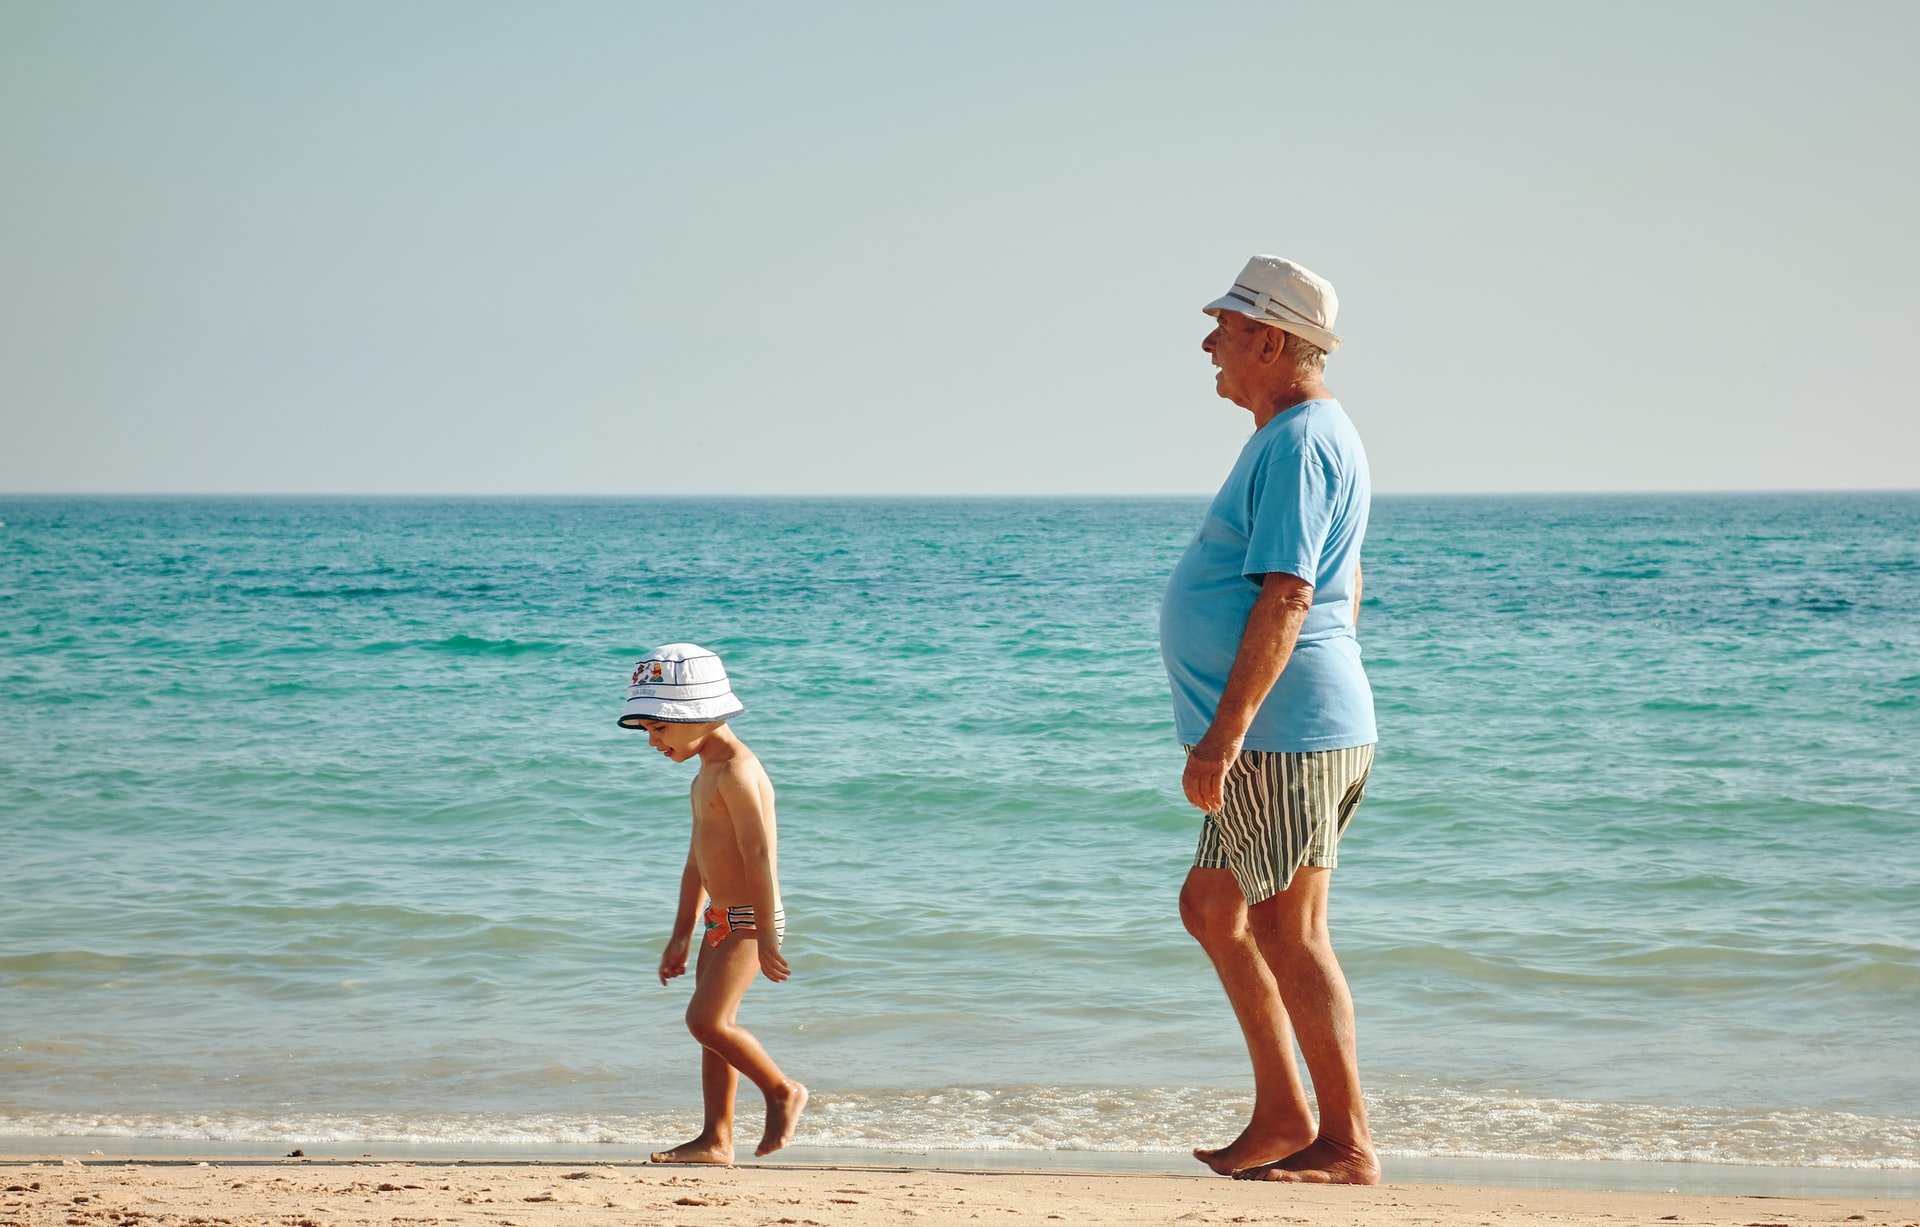 OP went on a vacation with his grandfather | Source: Unsplash